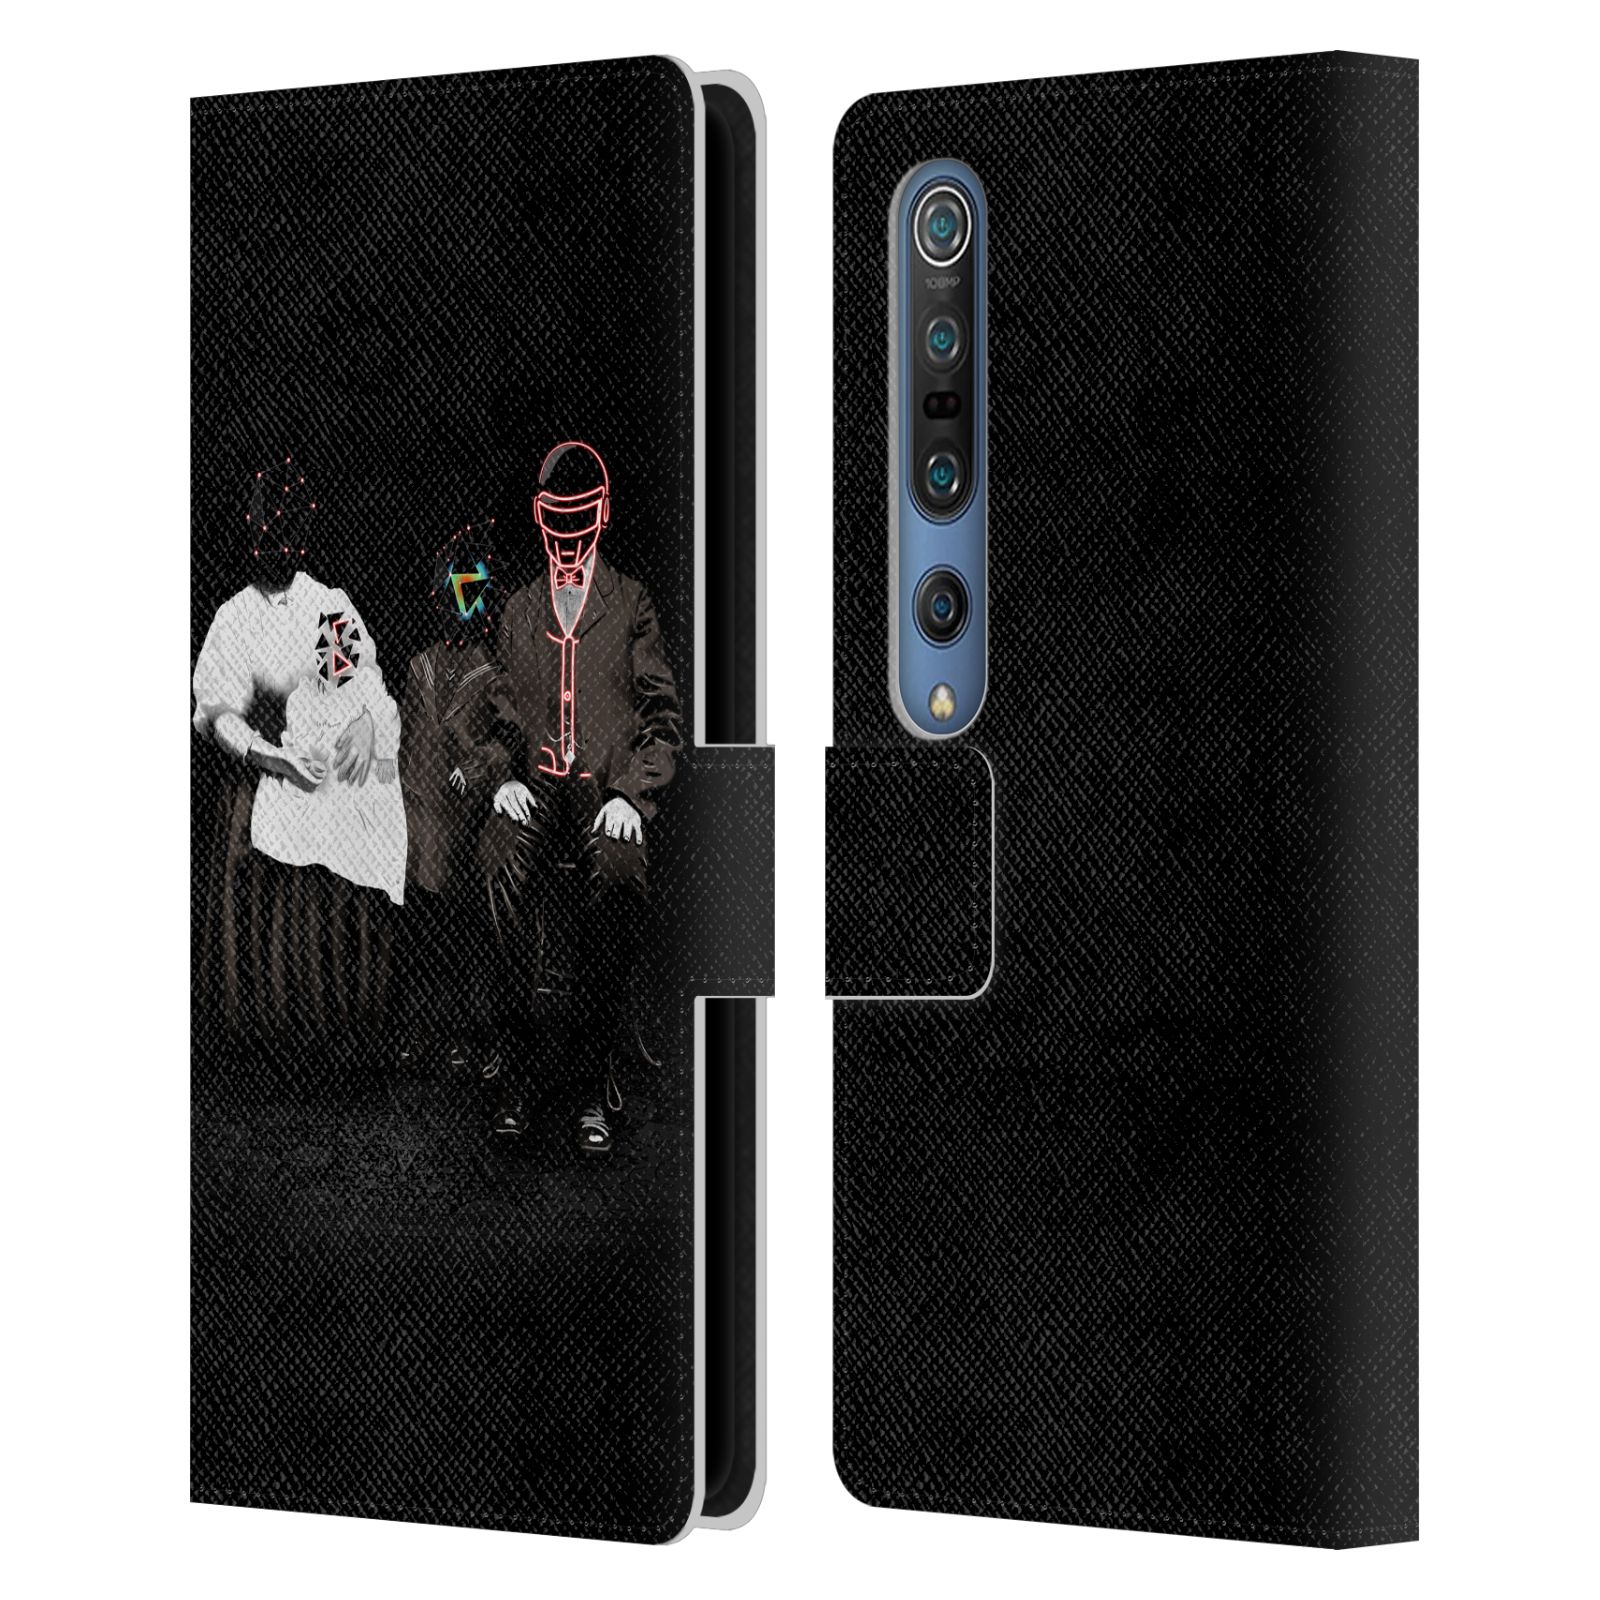 OFFICIAL FLORENT BODART MUSIC LEATHER BOOK WALLET CASE COVER FOR XIAOMI PHONES